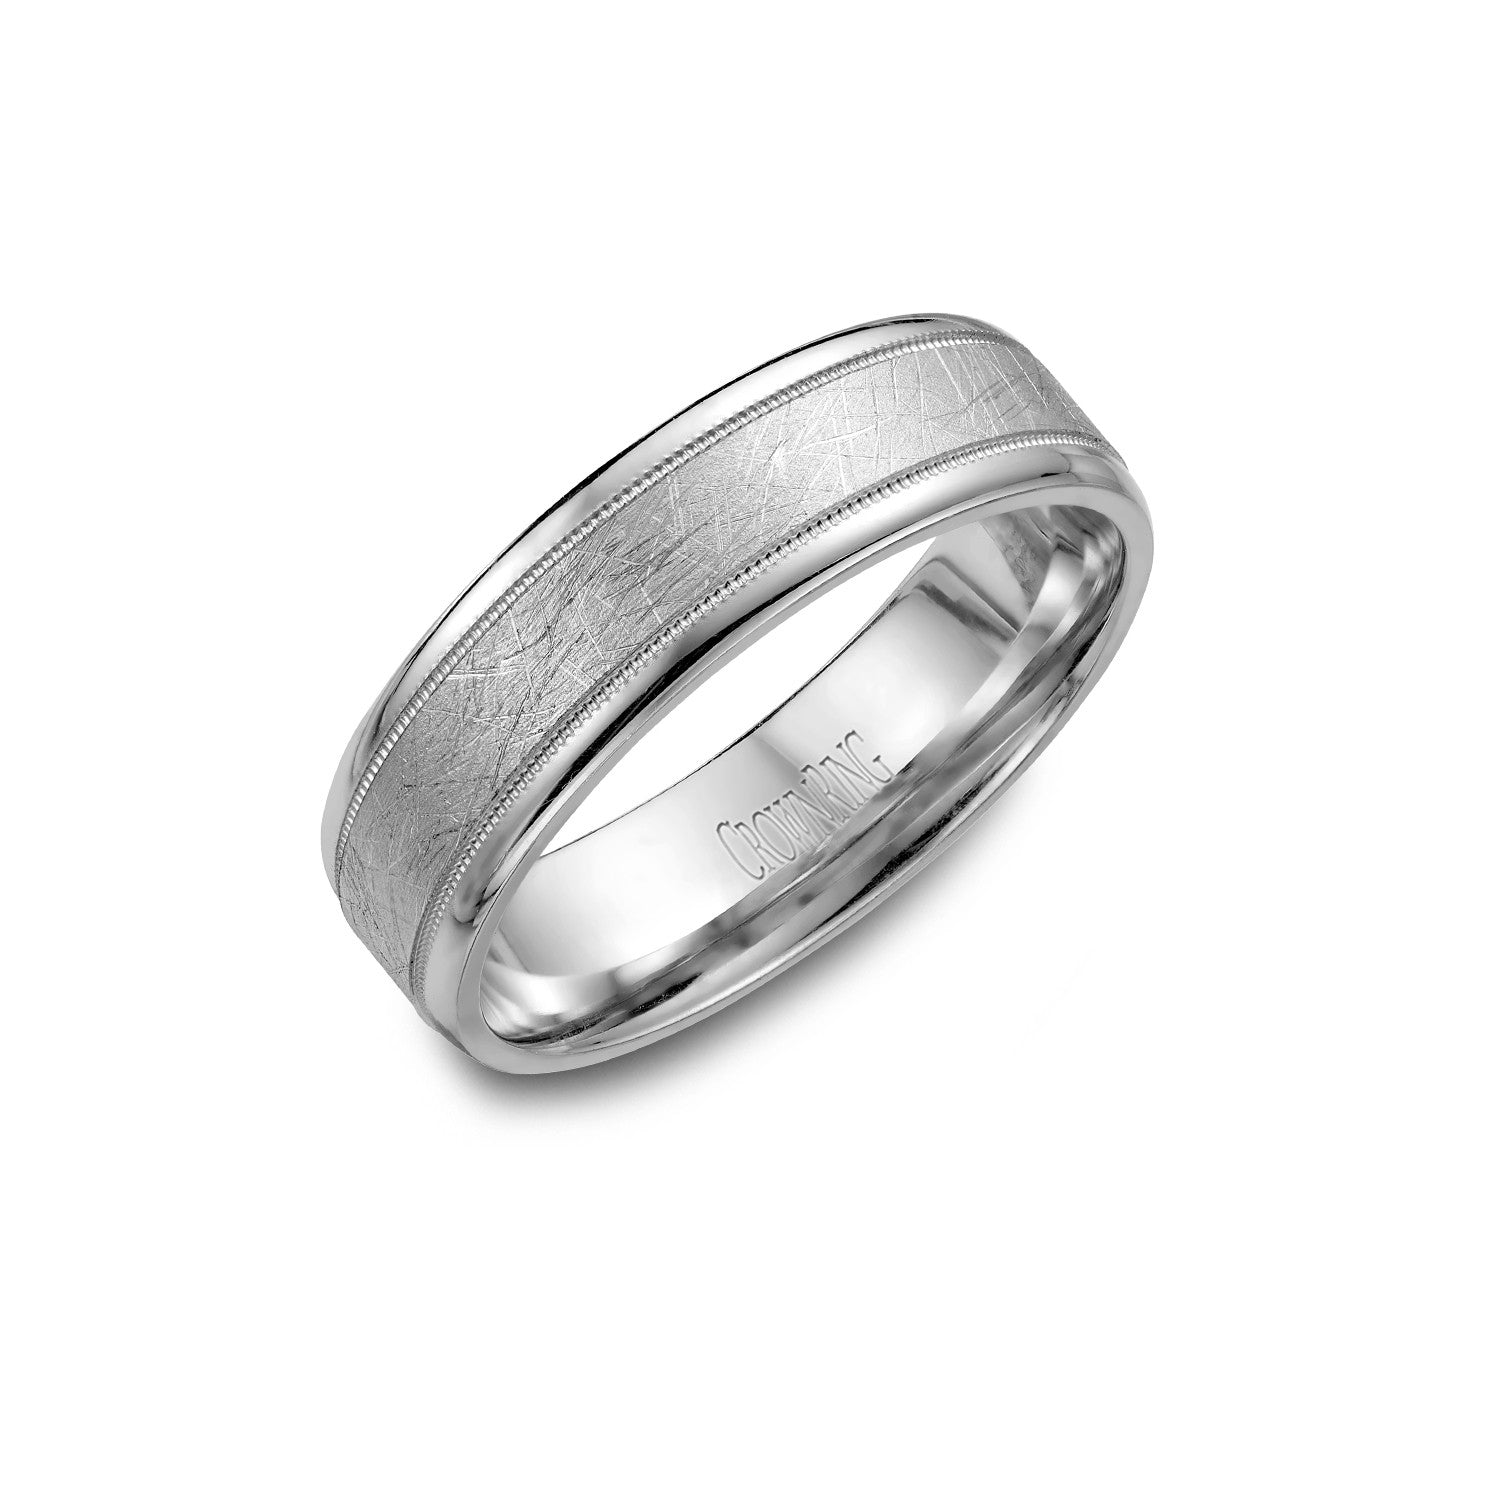 Barmakian Crownring Men S Wedding Band With Textured Center